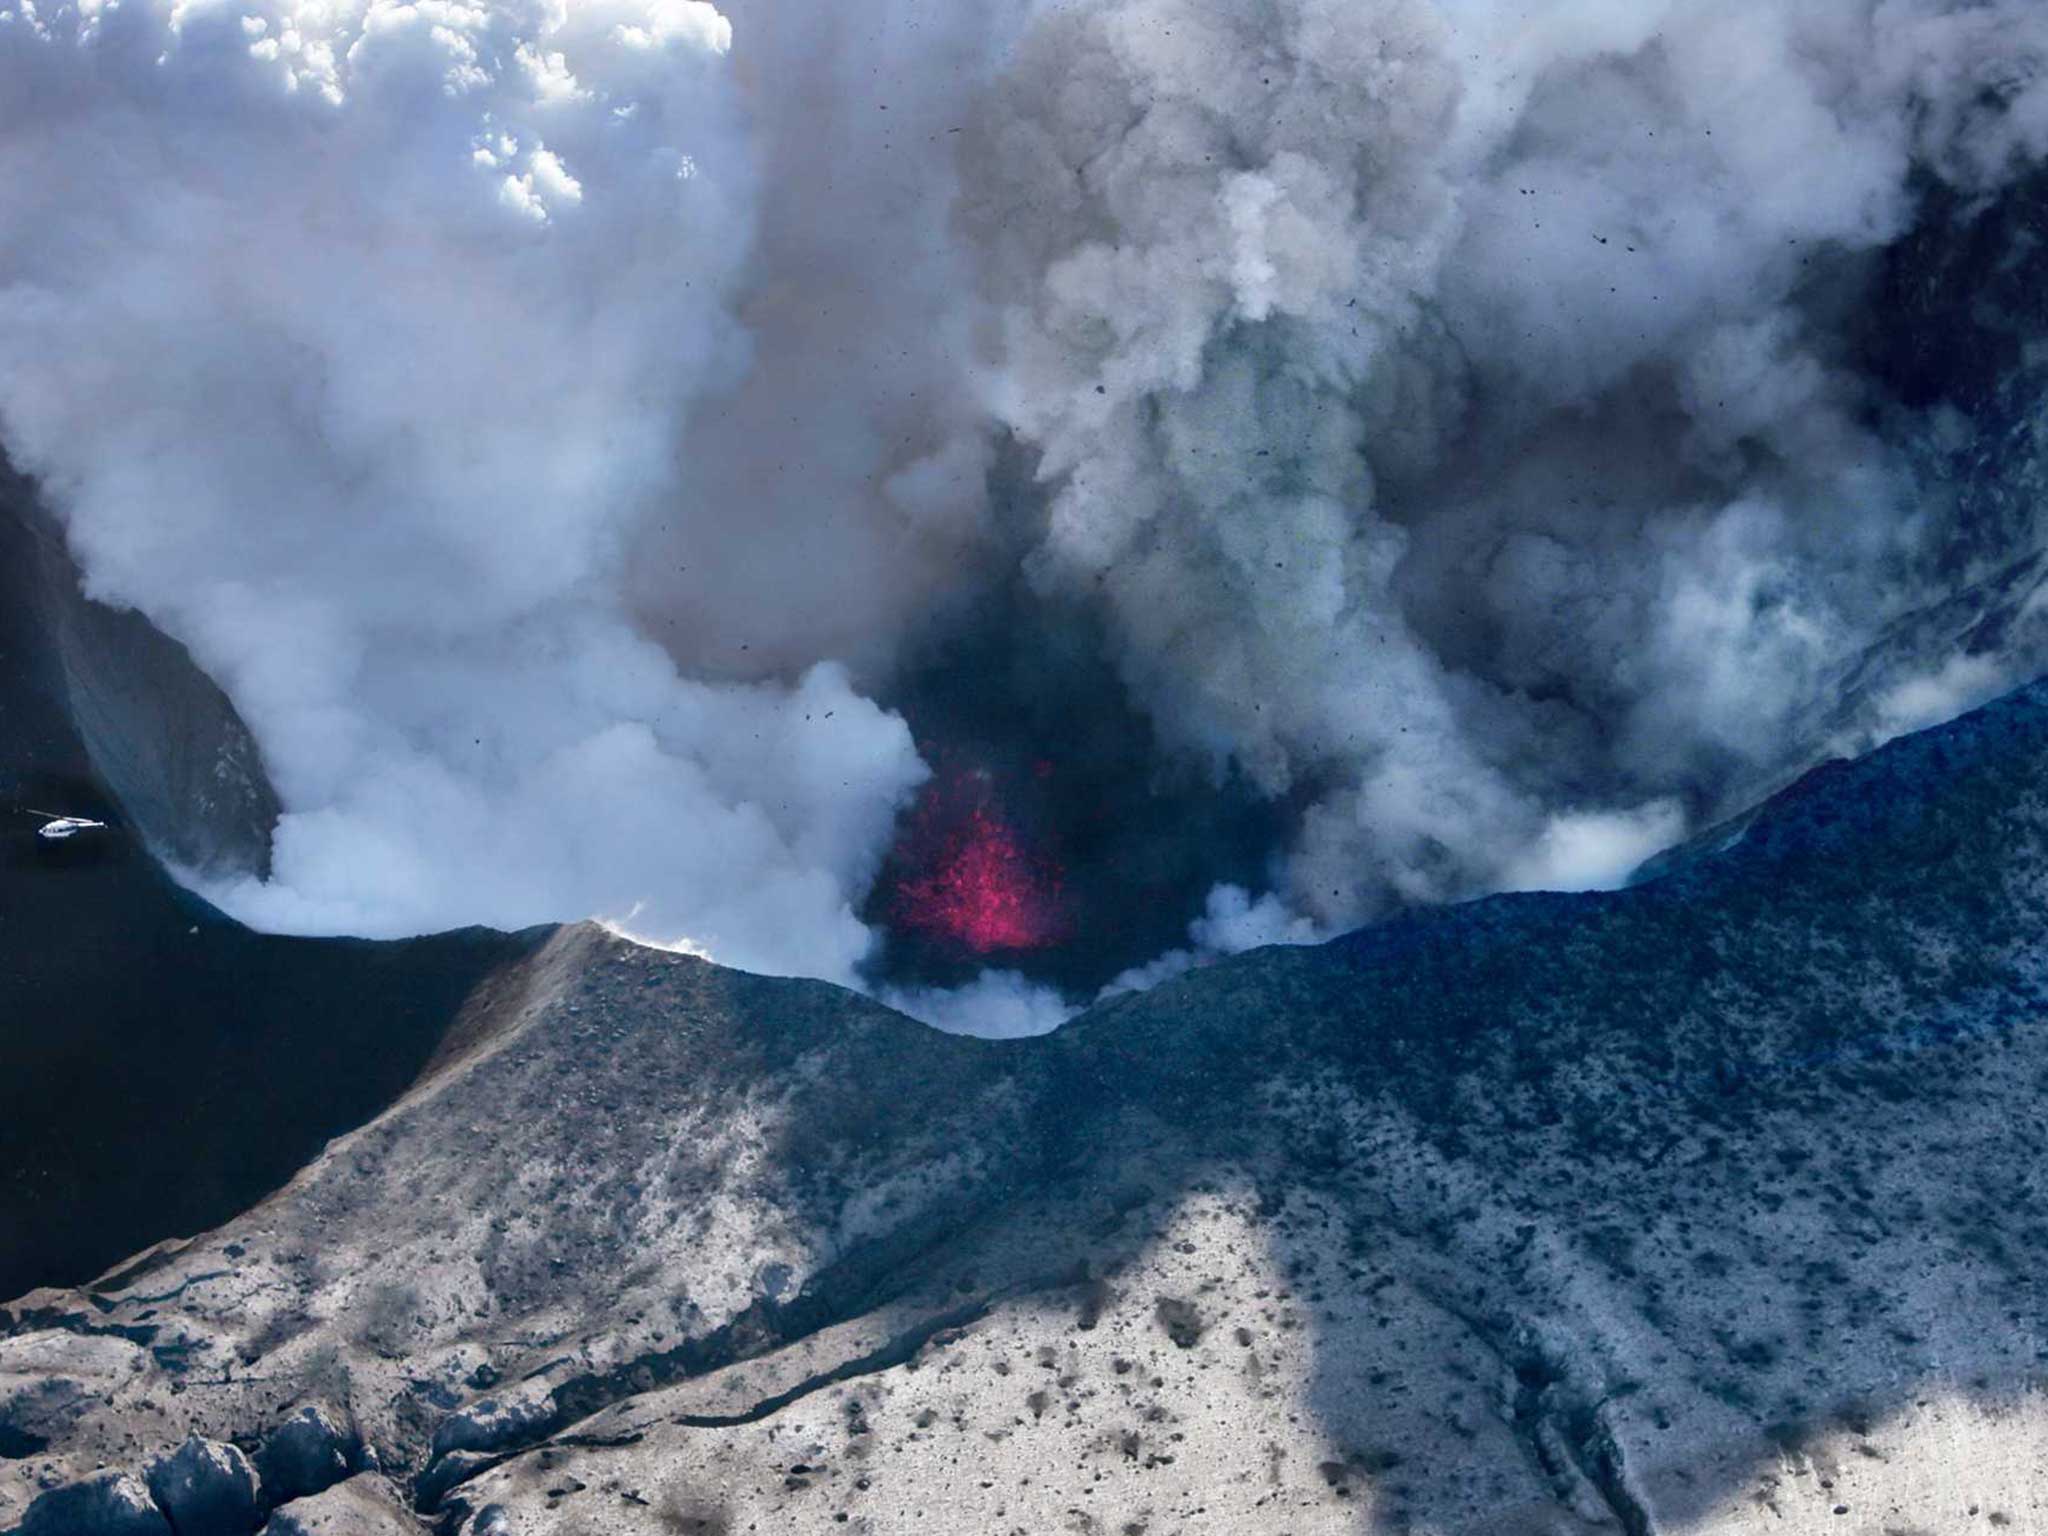 Smoke billows from the erupting volcano with fire in 2010